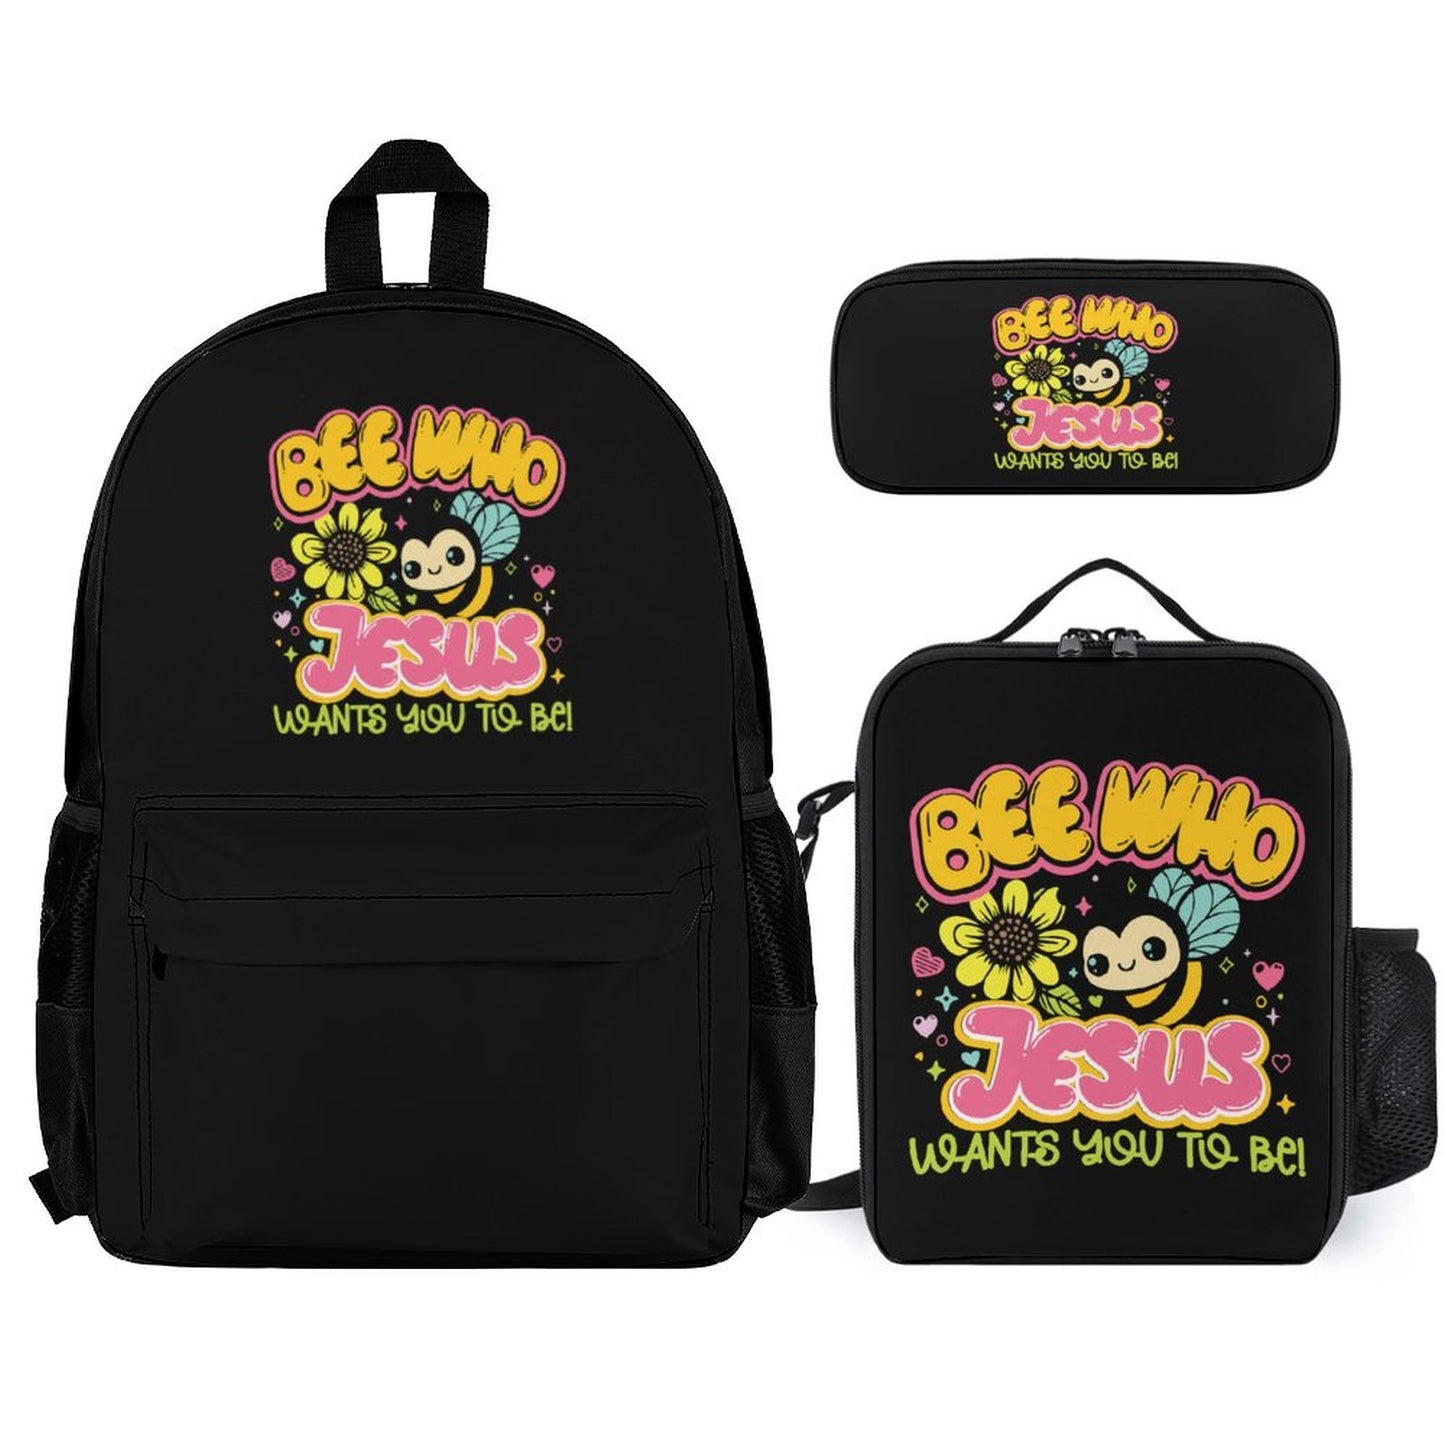 Bee Who Jesus Wants You To Be Christian Backpack Set of 3 Bags (Shoulder Bag Lunch Bag & Pencil Pouch)